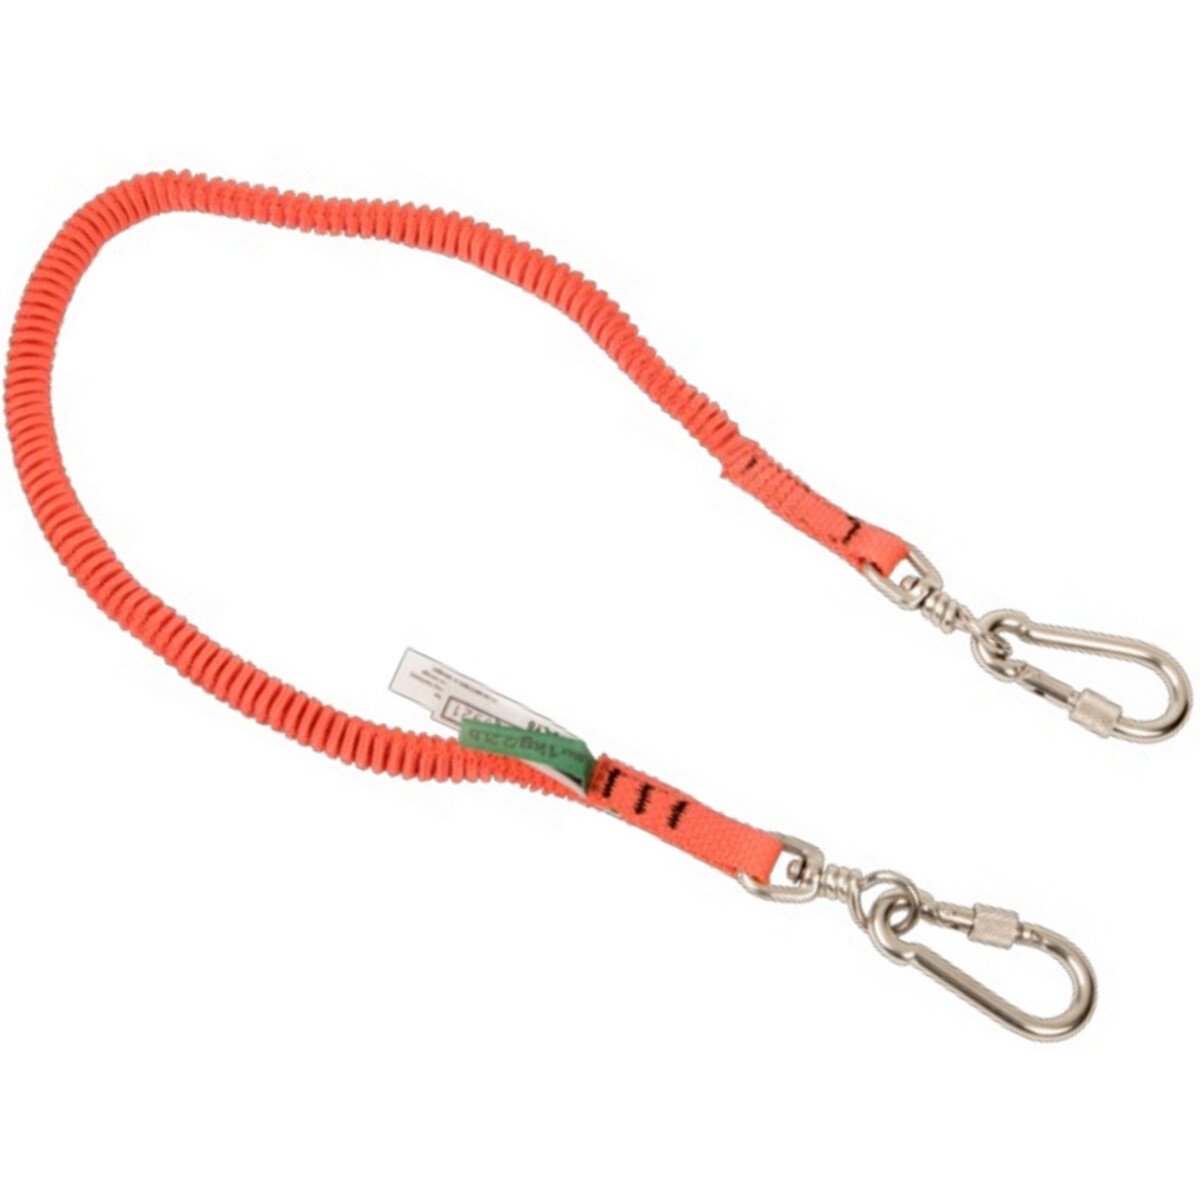 Bahco 3875-LY6 Lanyard for 1kg with Swivel Carabiners